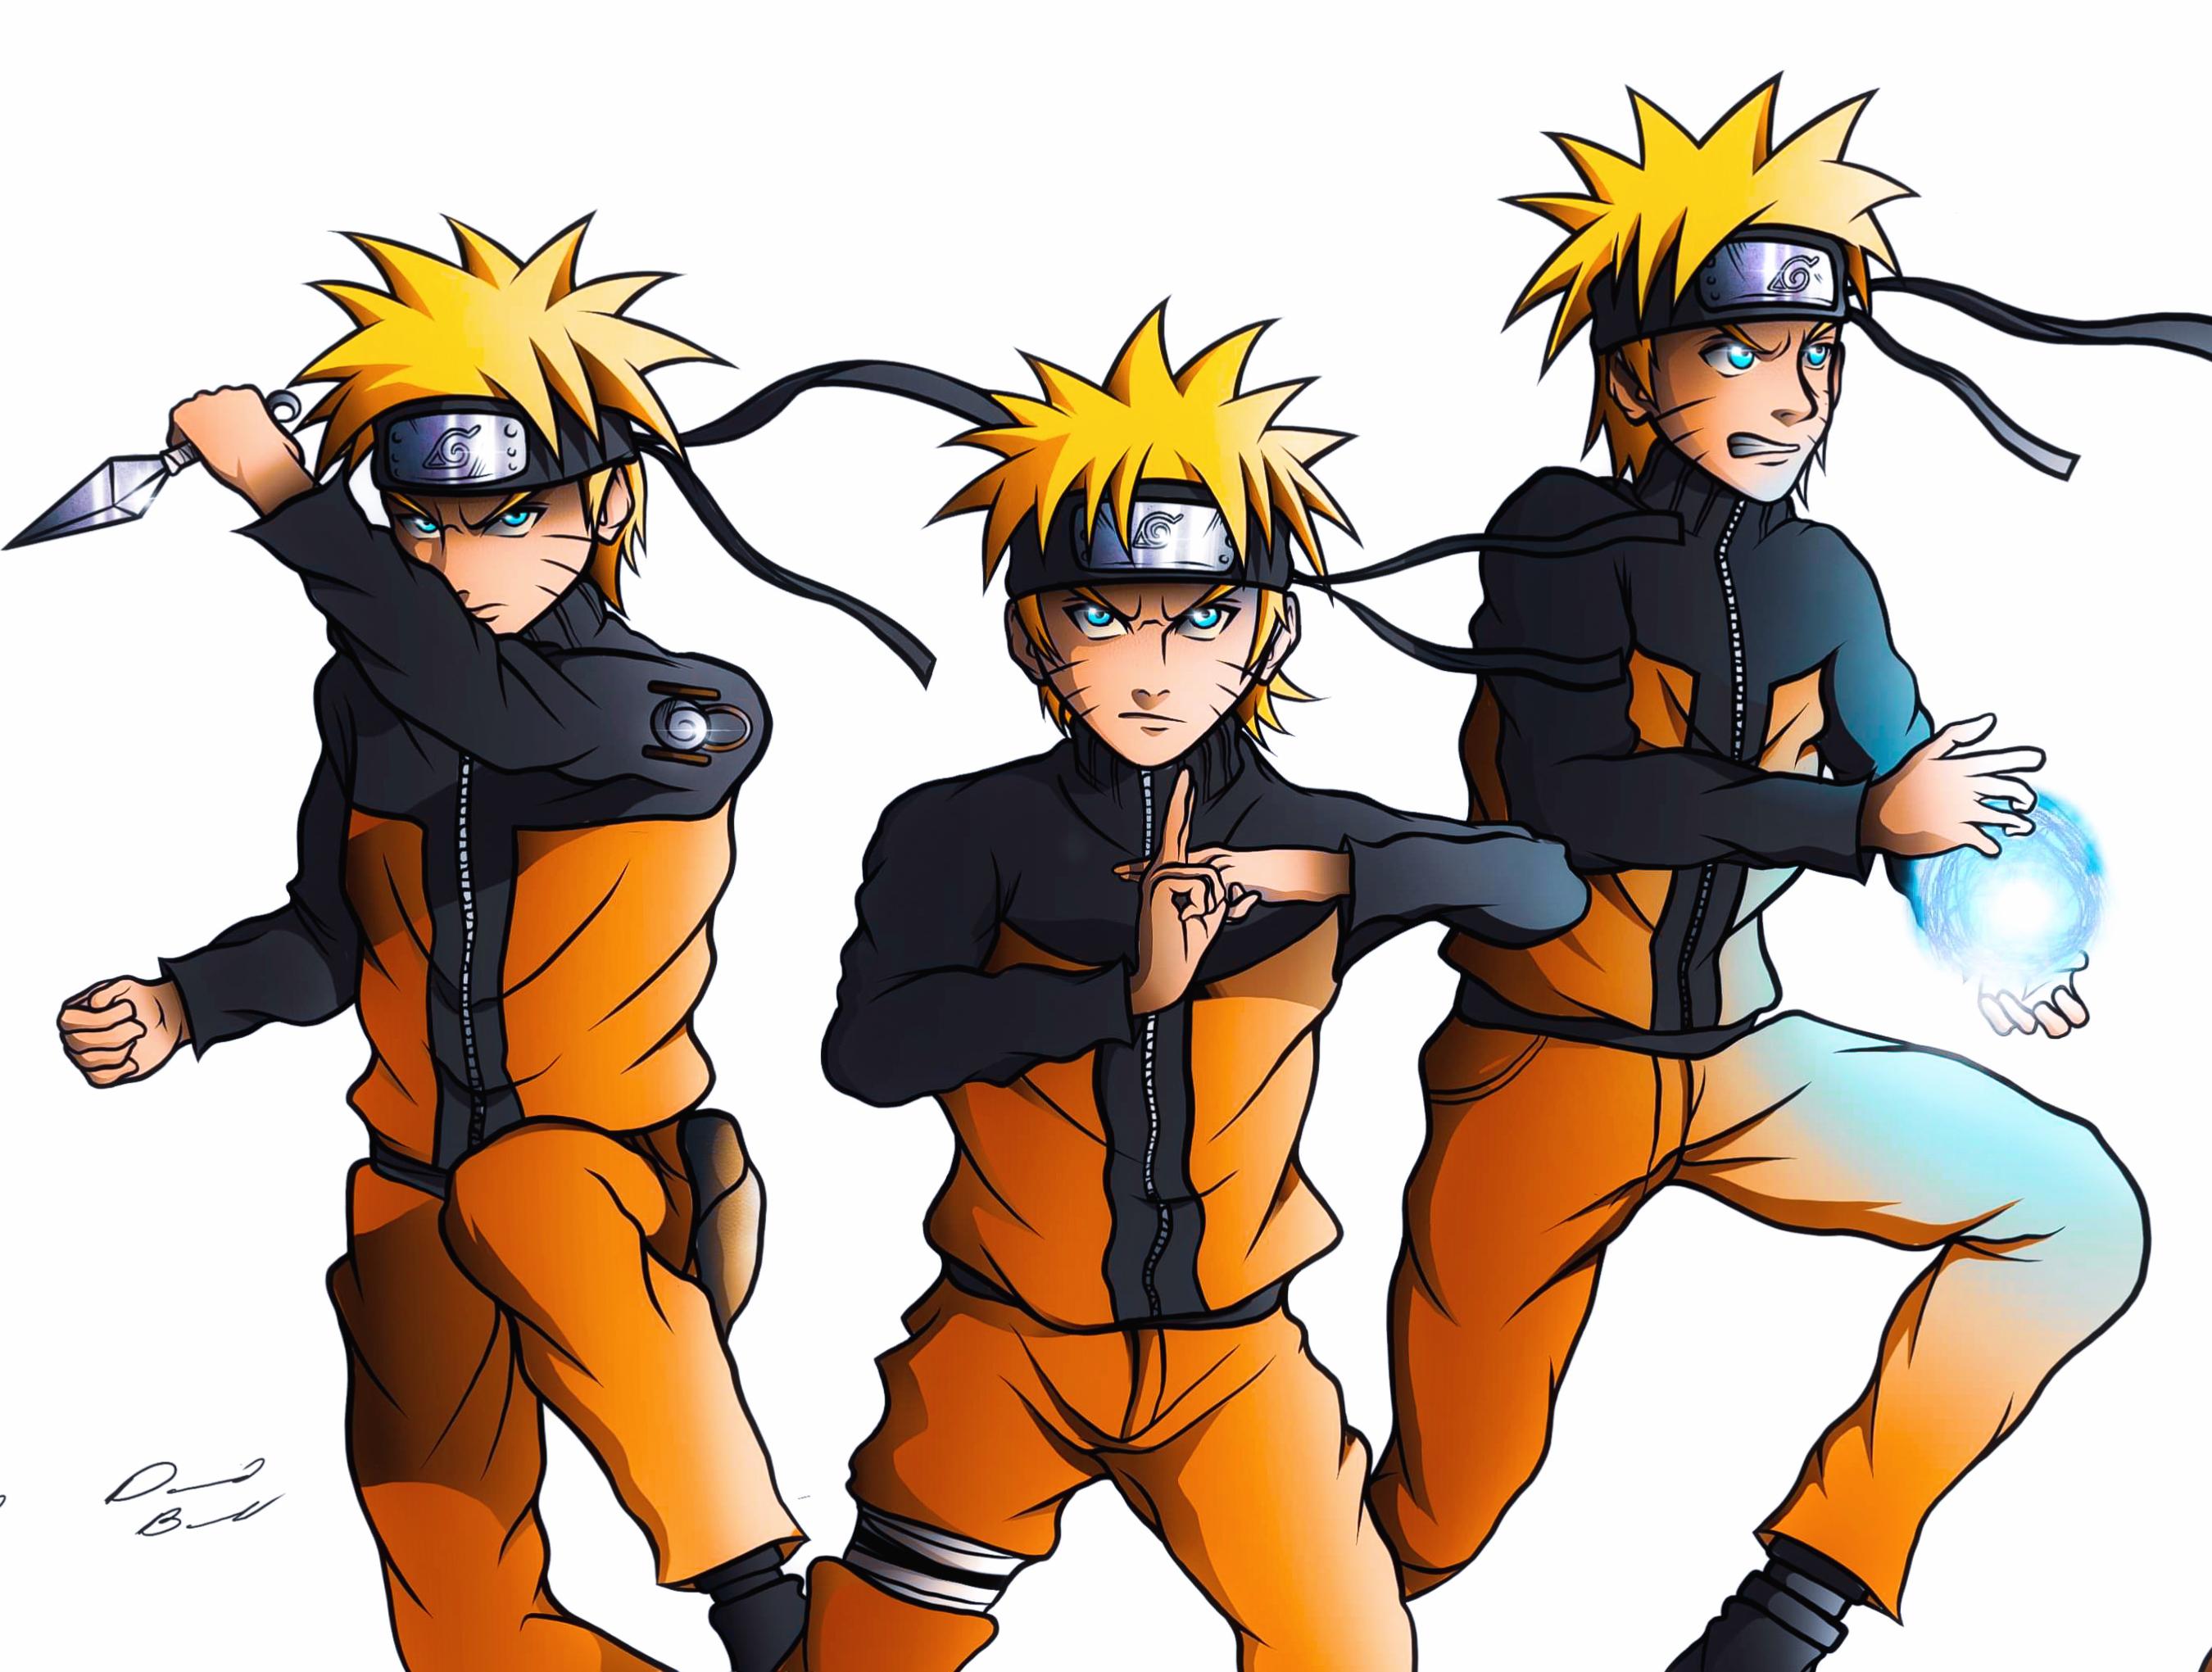 Decided to draw our boy Naruto using shadow clone jutsu, hope you guys like this one!